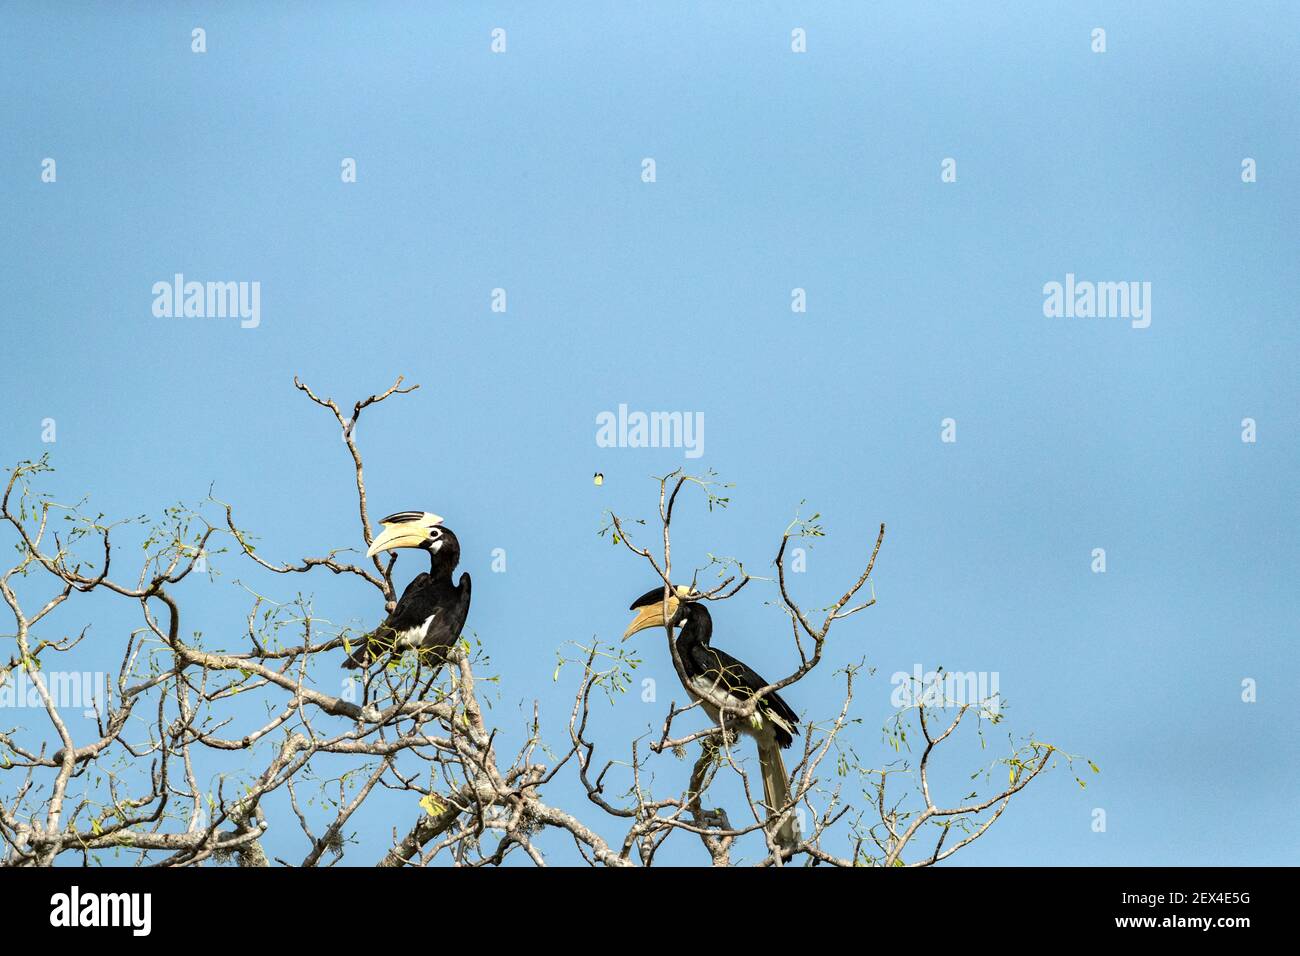 Couple of Malabar pied hornbills, female and male (Anthracoceros coronatus) perched in tree, Yala National Park, Southern Province, Sri Lanka. Stock Photo